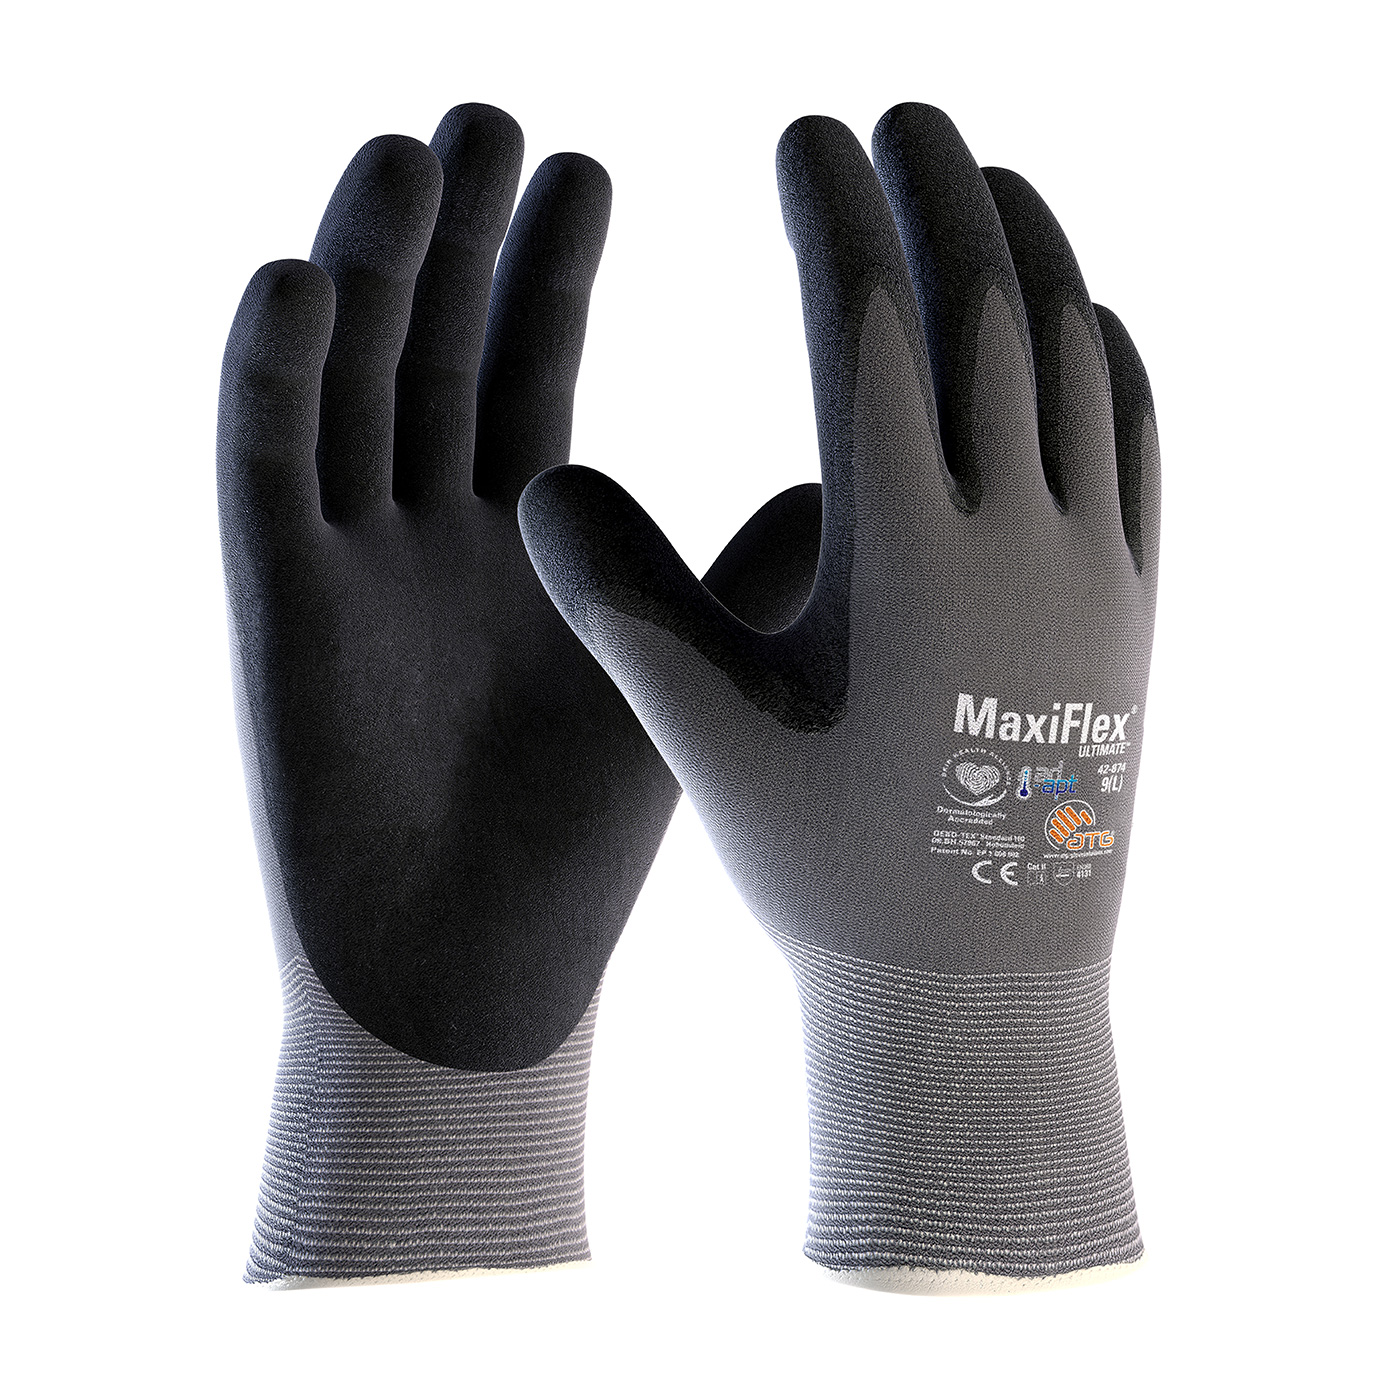 PIP 42-874/L MaxiFlex Ultimate AD-APT Seamless Knit Nylon/Lycra Glove with Nitrile Coated MicroFoam Grip on Palm & Fingers and AD-APT Technology - Large PID-42874L